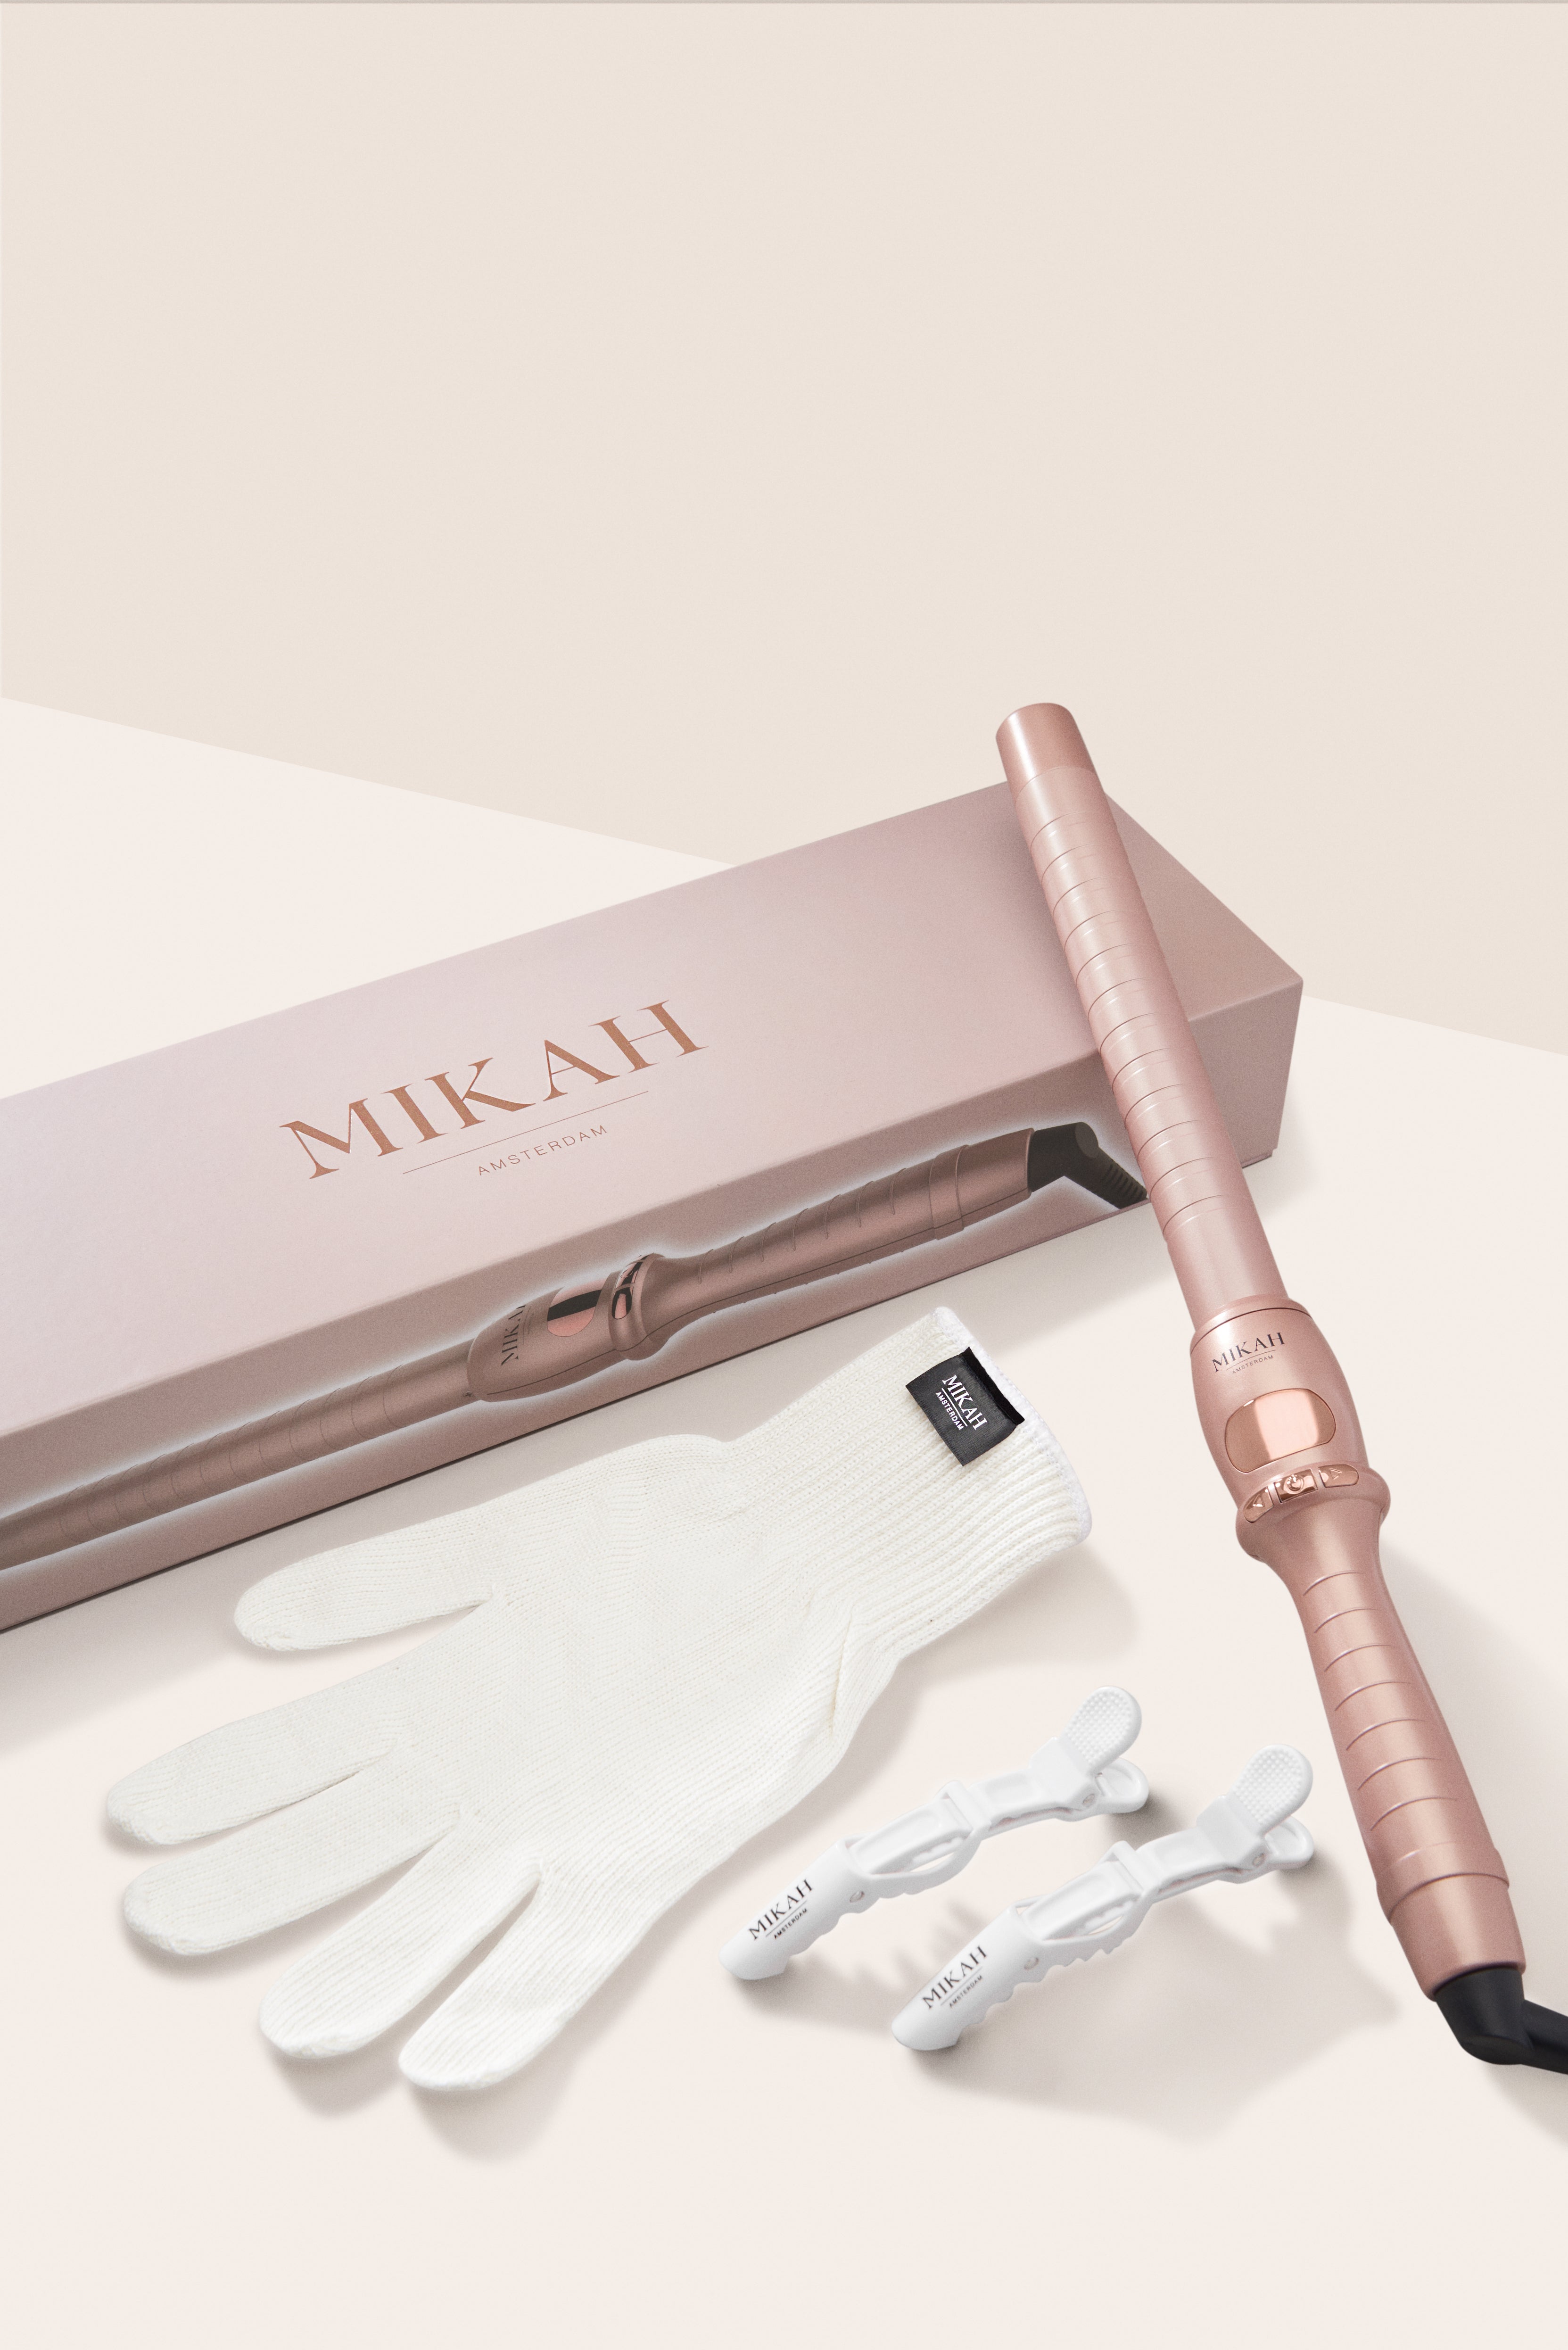 MIKAH - Professional Curling Iron 25 mm